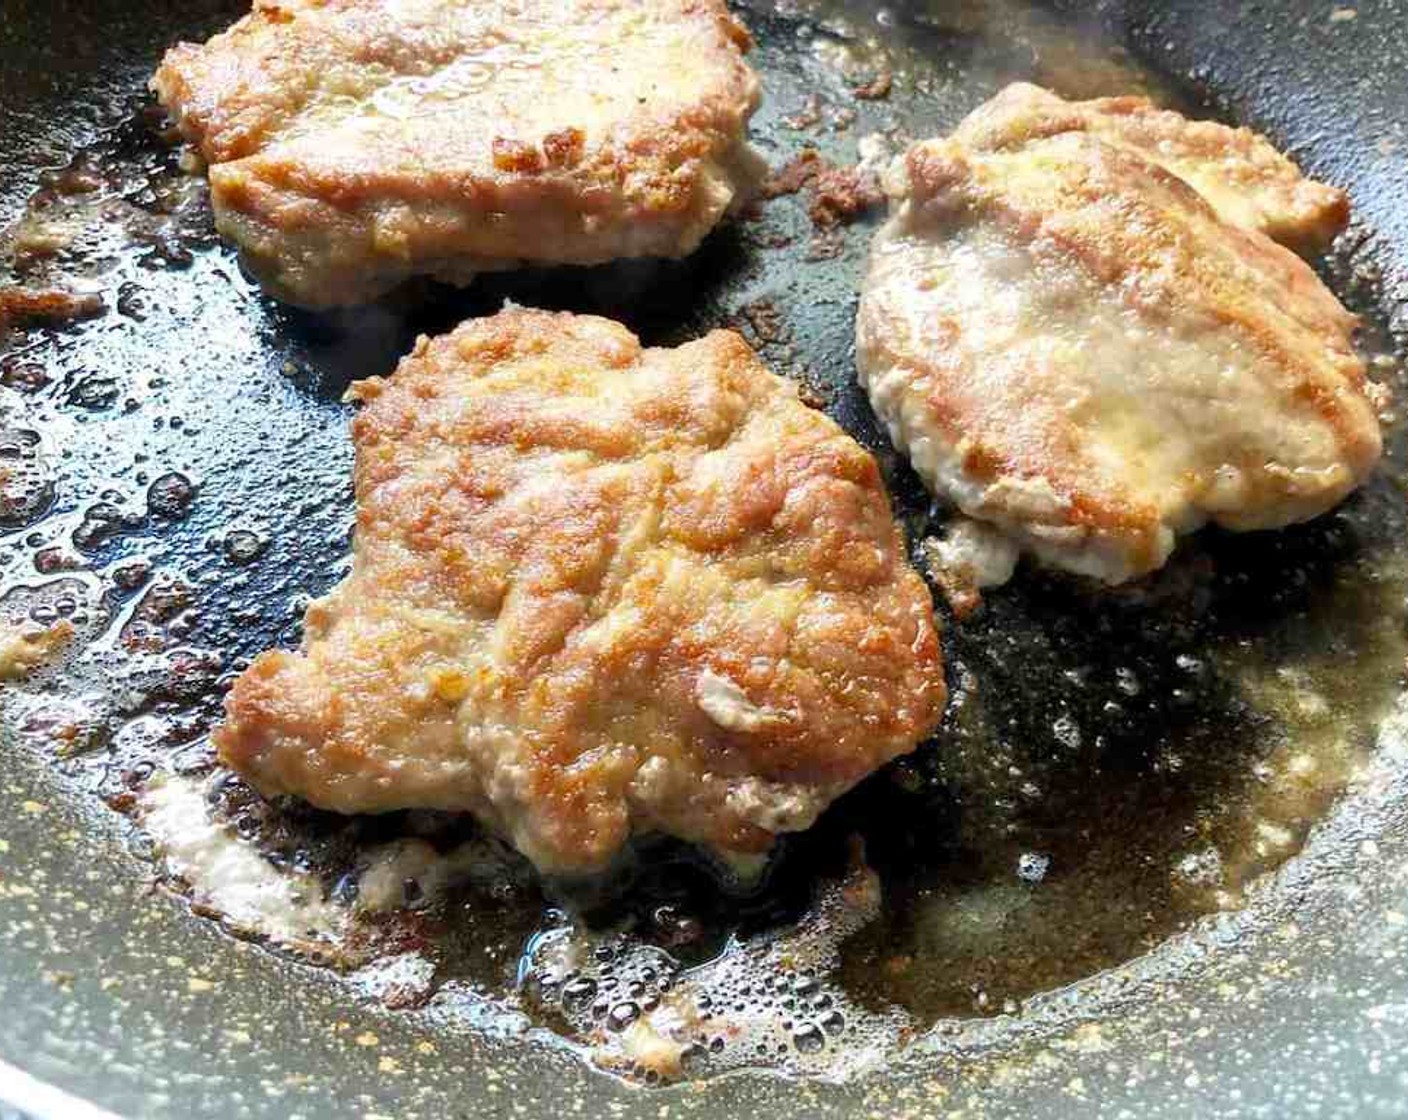 step 5 Saute' half the pork in the oil mixture, until the meat is lightly browned, about 2-4 minutes per side.